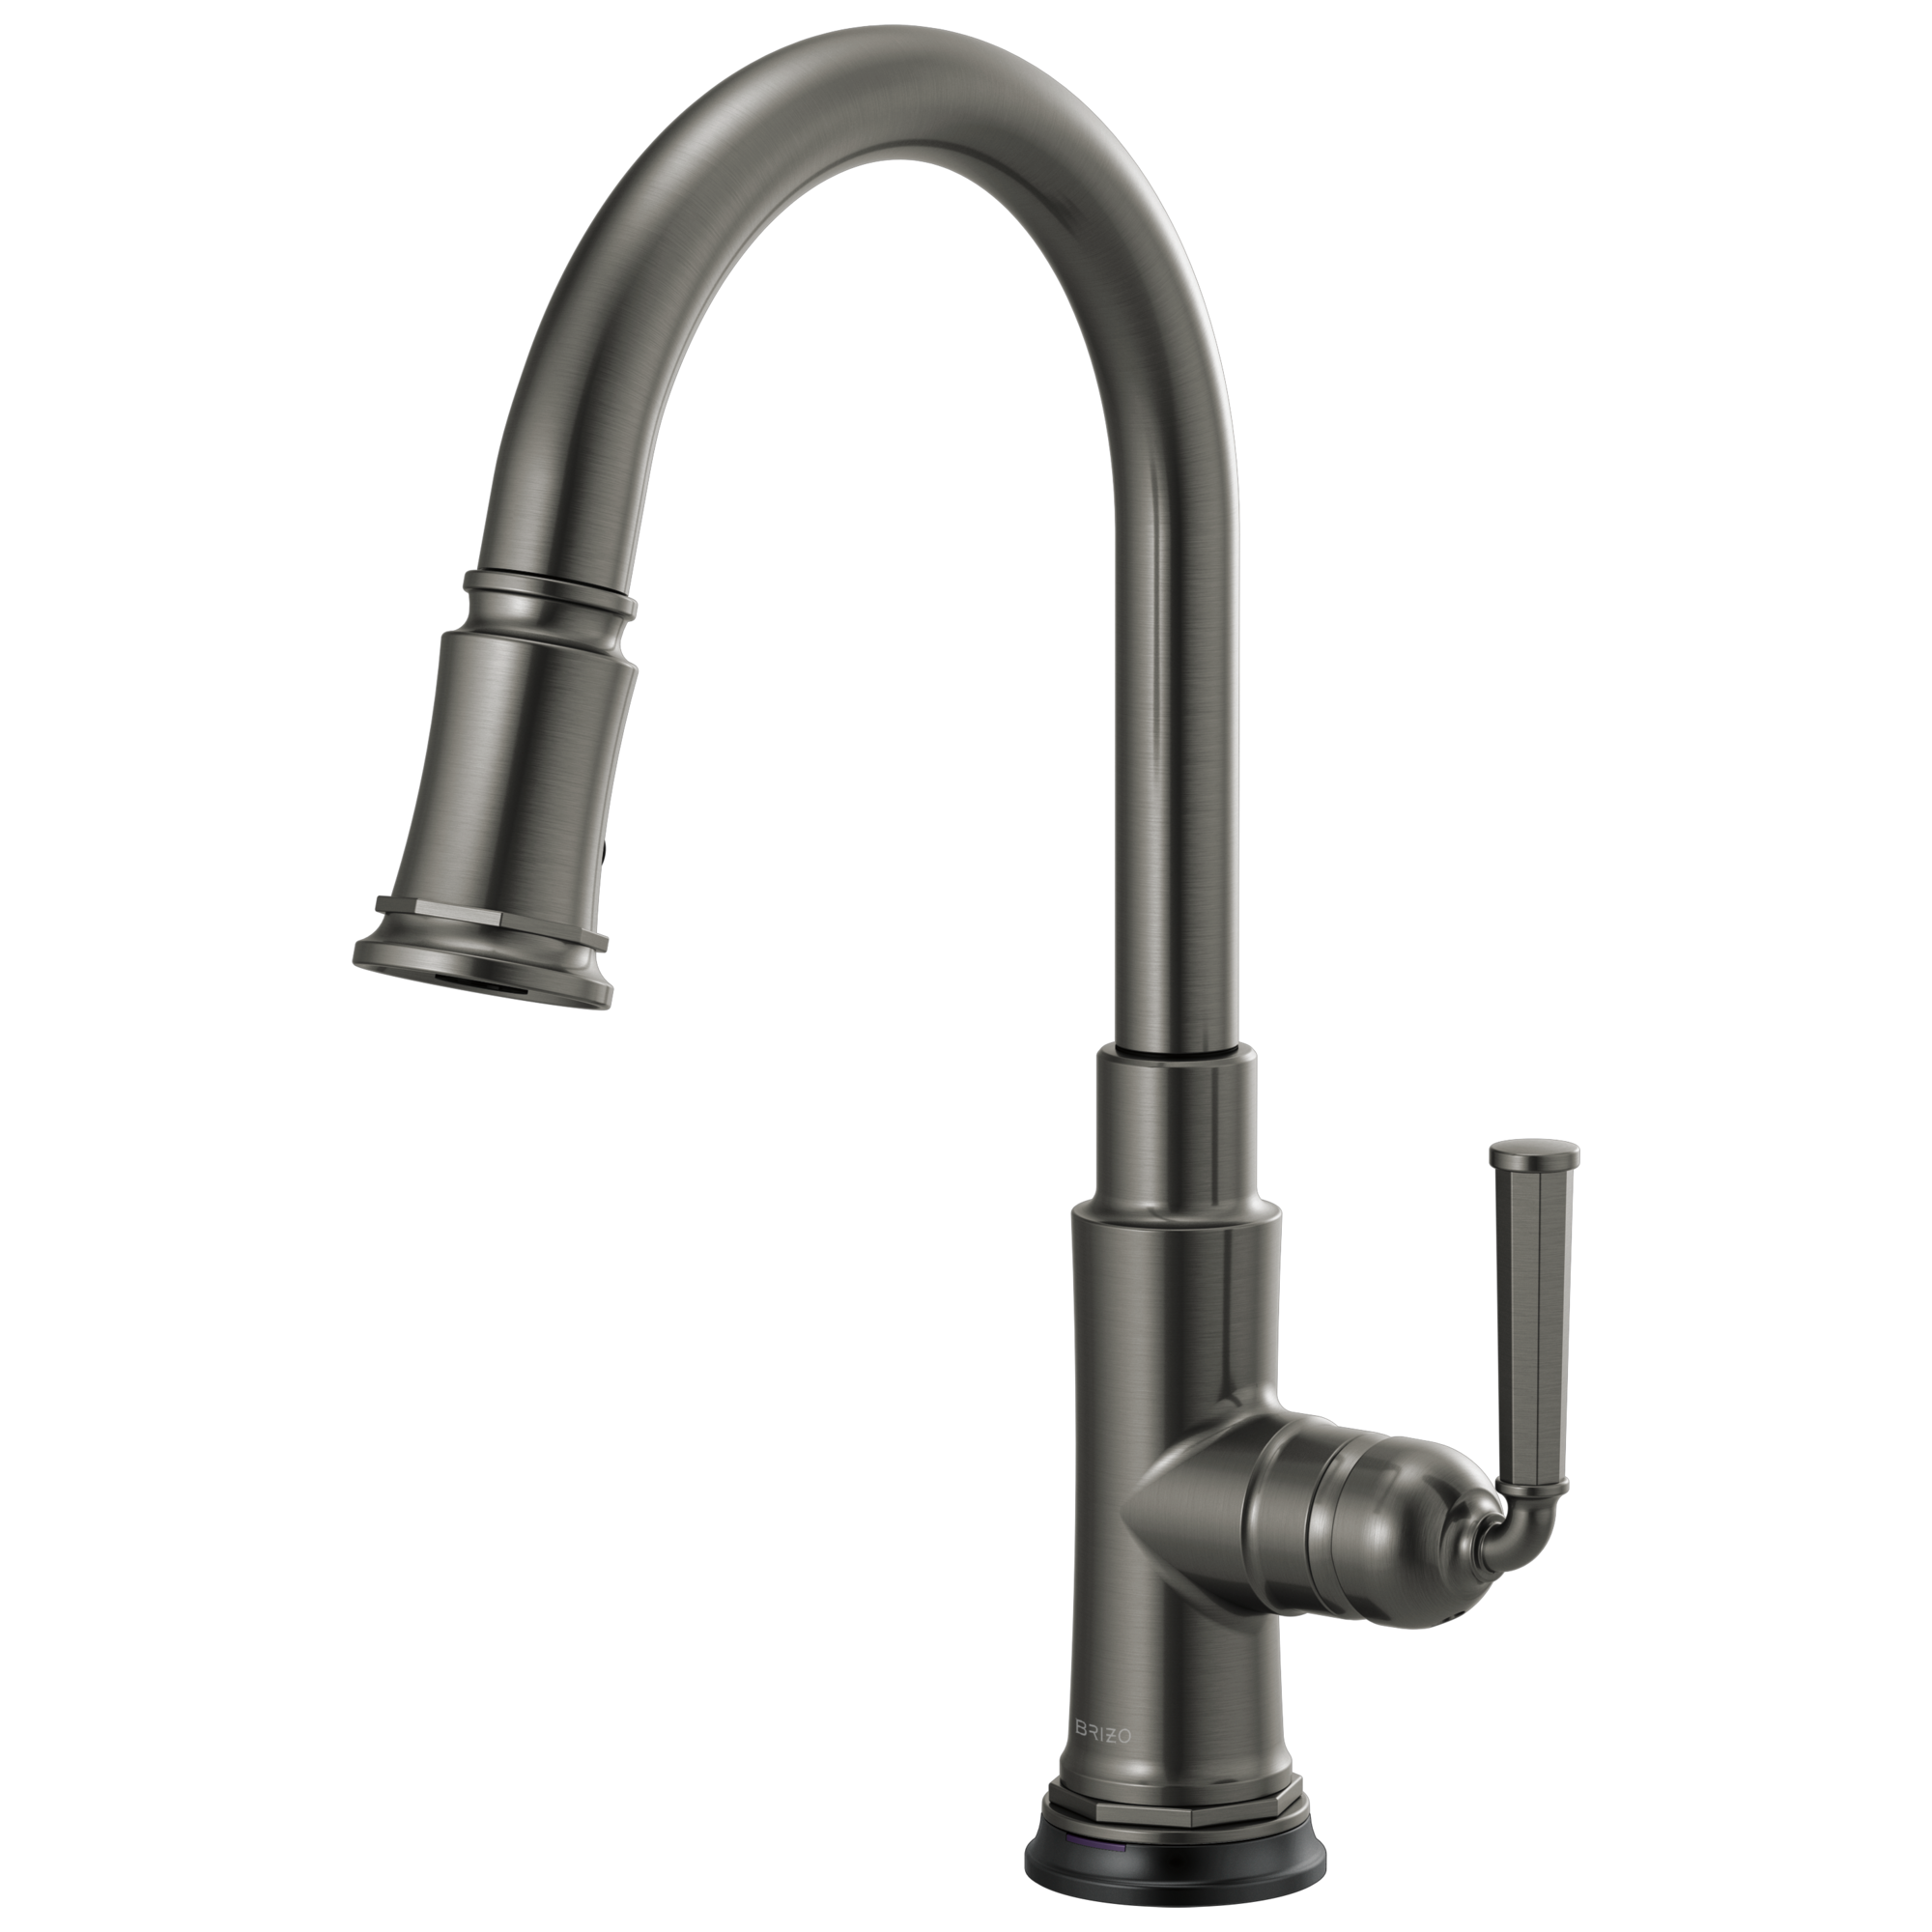 Brizo Rook Smart Touch Pull-Down Kitchen Faucet